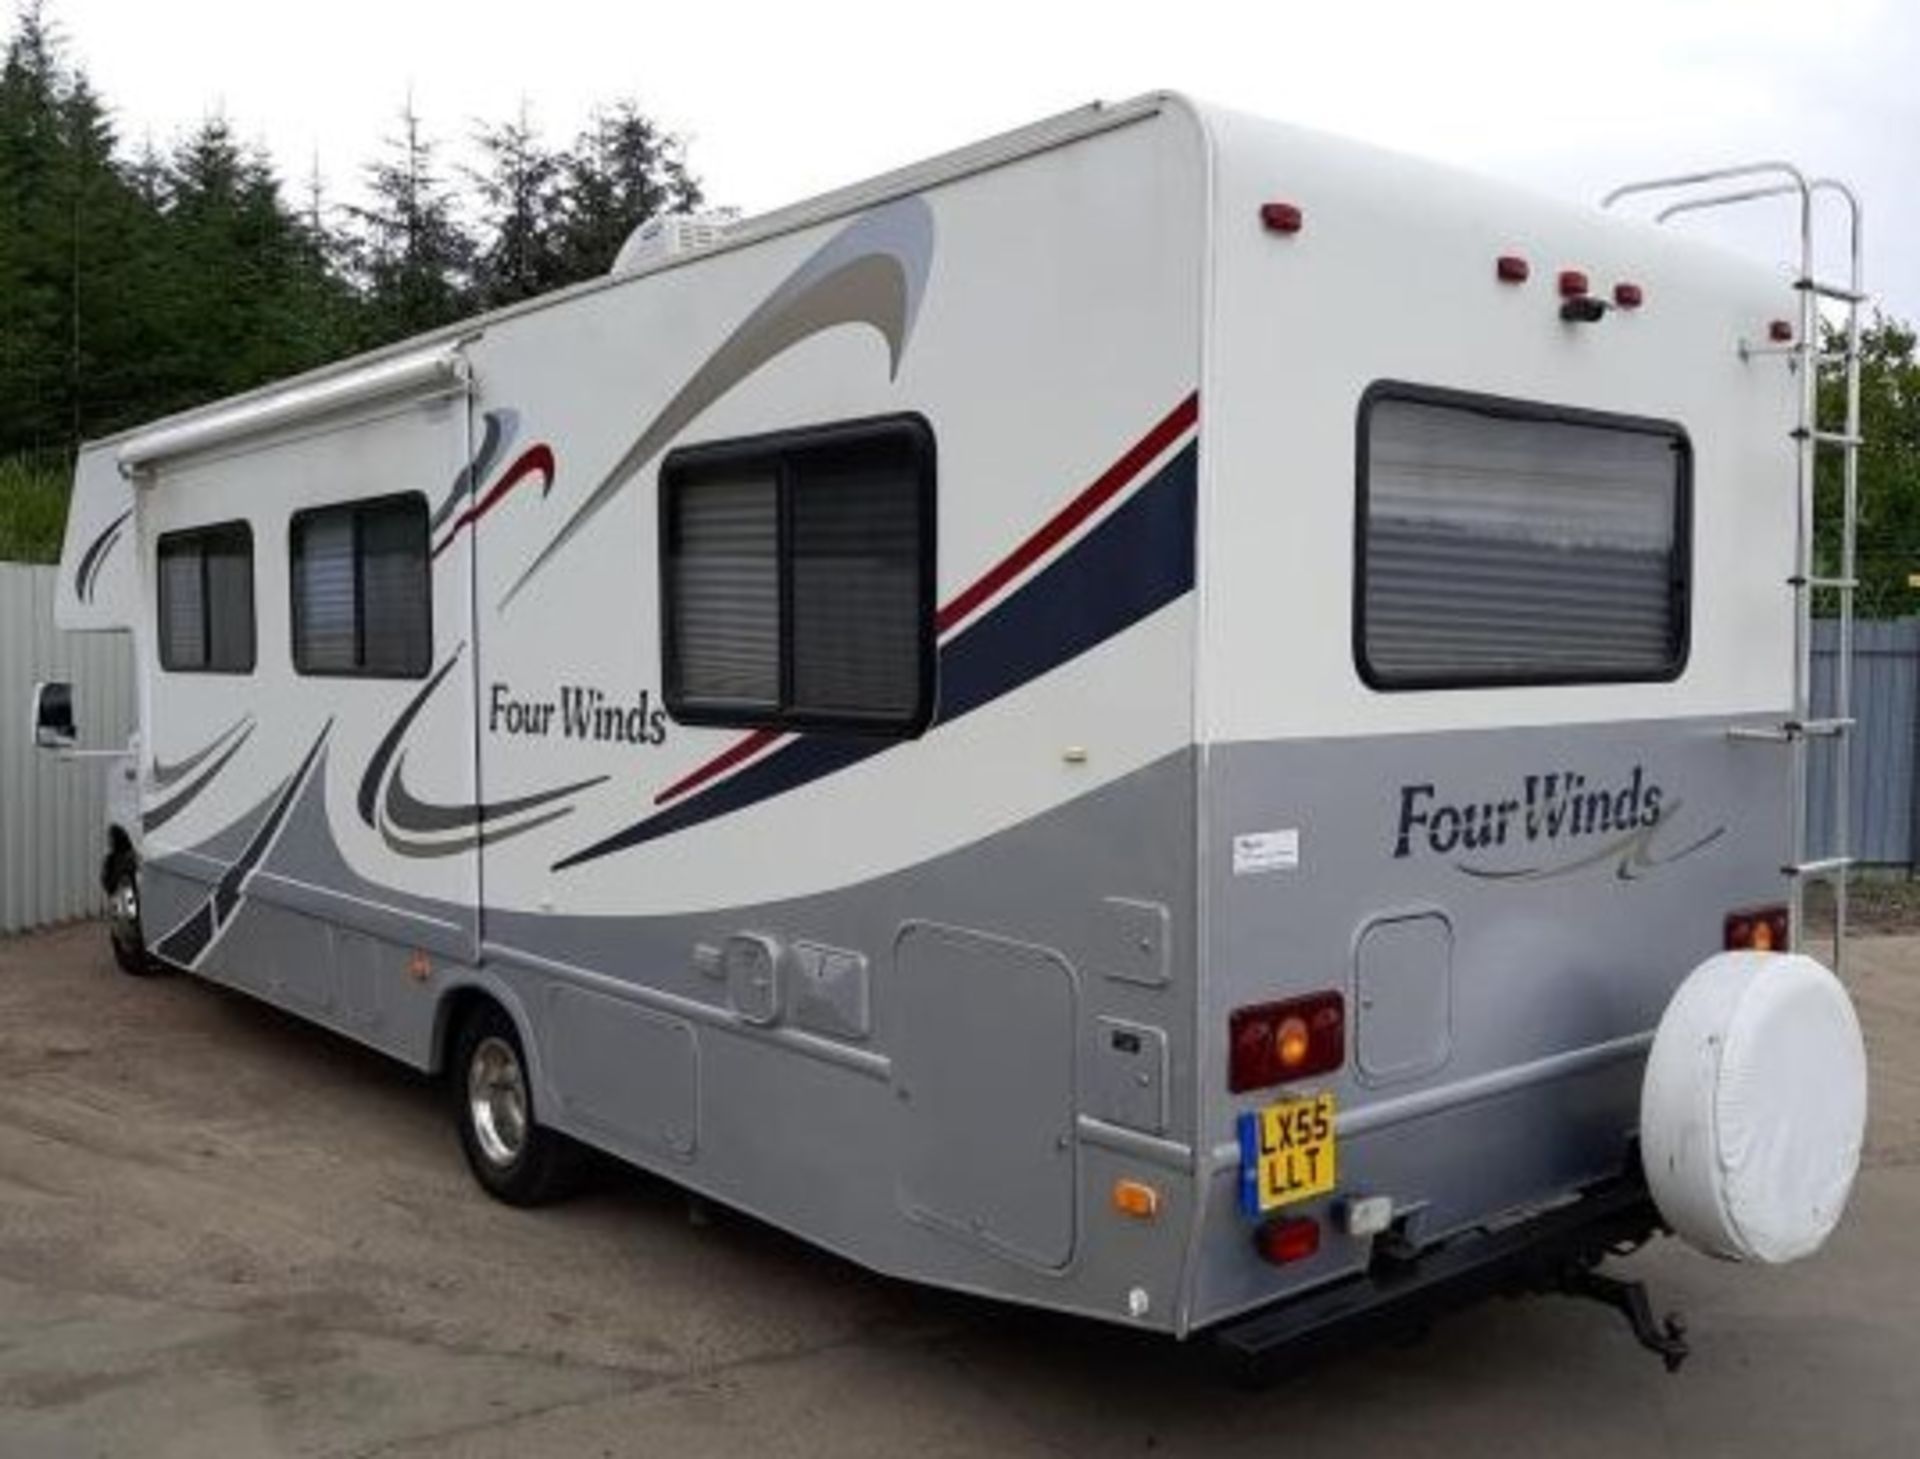 FORD E450 FOURWINDS RV 7 BERTH LHD MOTORHOME, VERY LOW MILEAGE 34,453 MILES *NO VAT* - Image 3 of 14